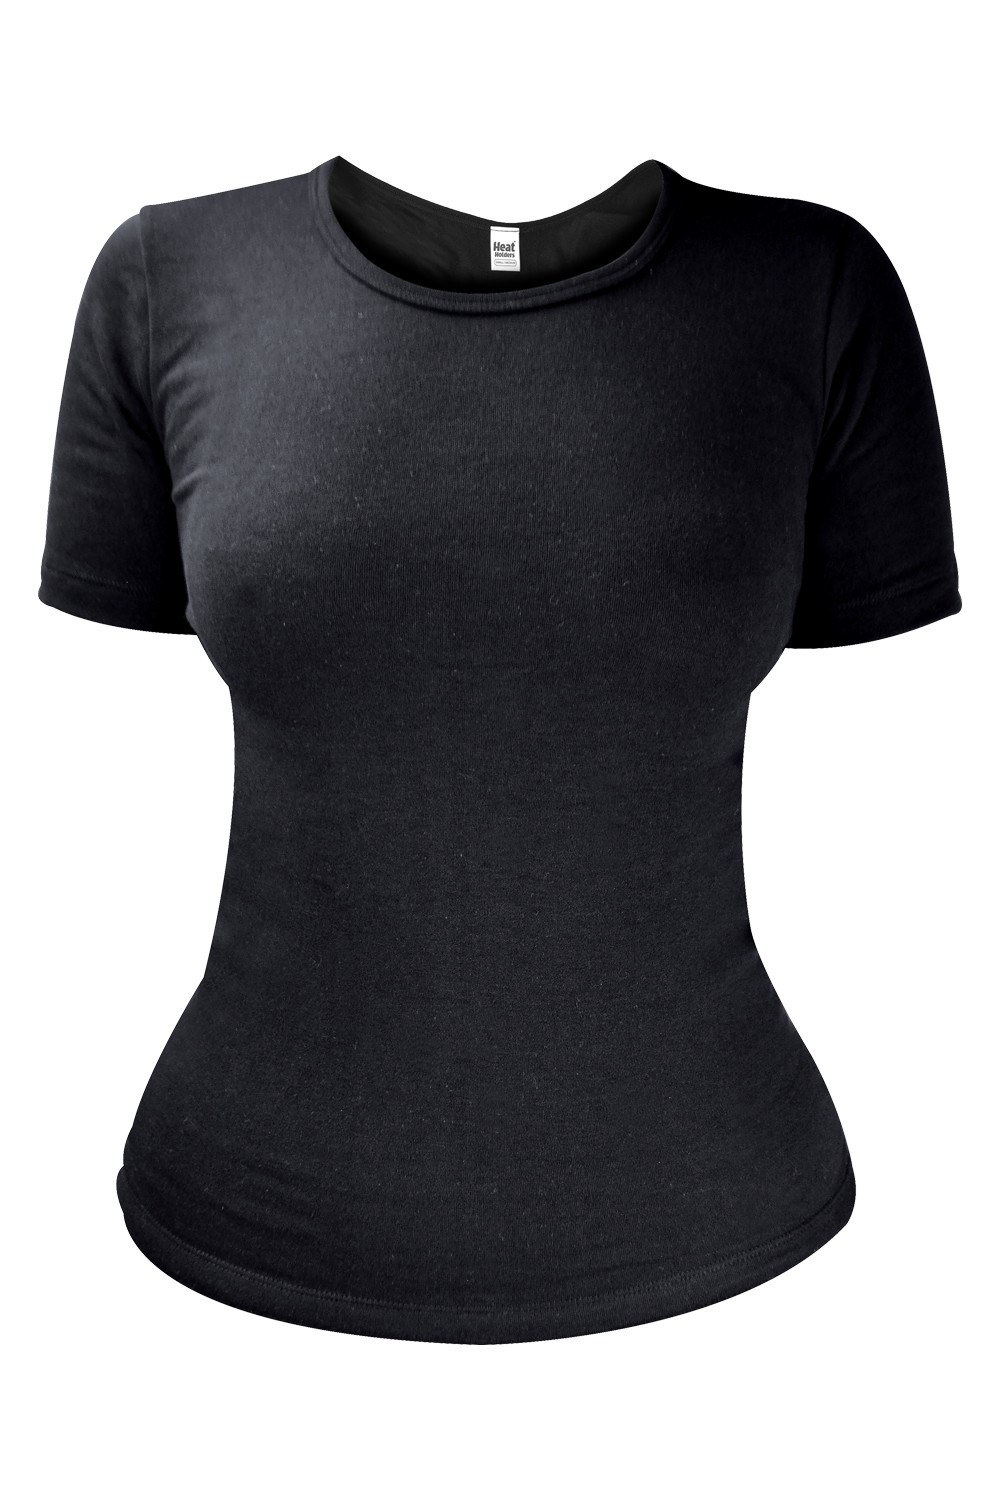 Womens Short Sleeved Thermal Top -